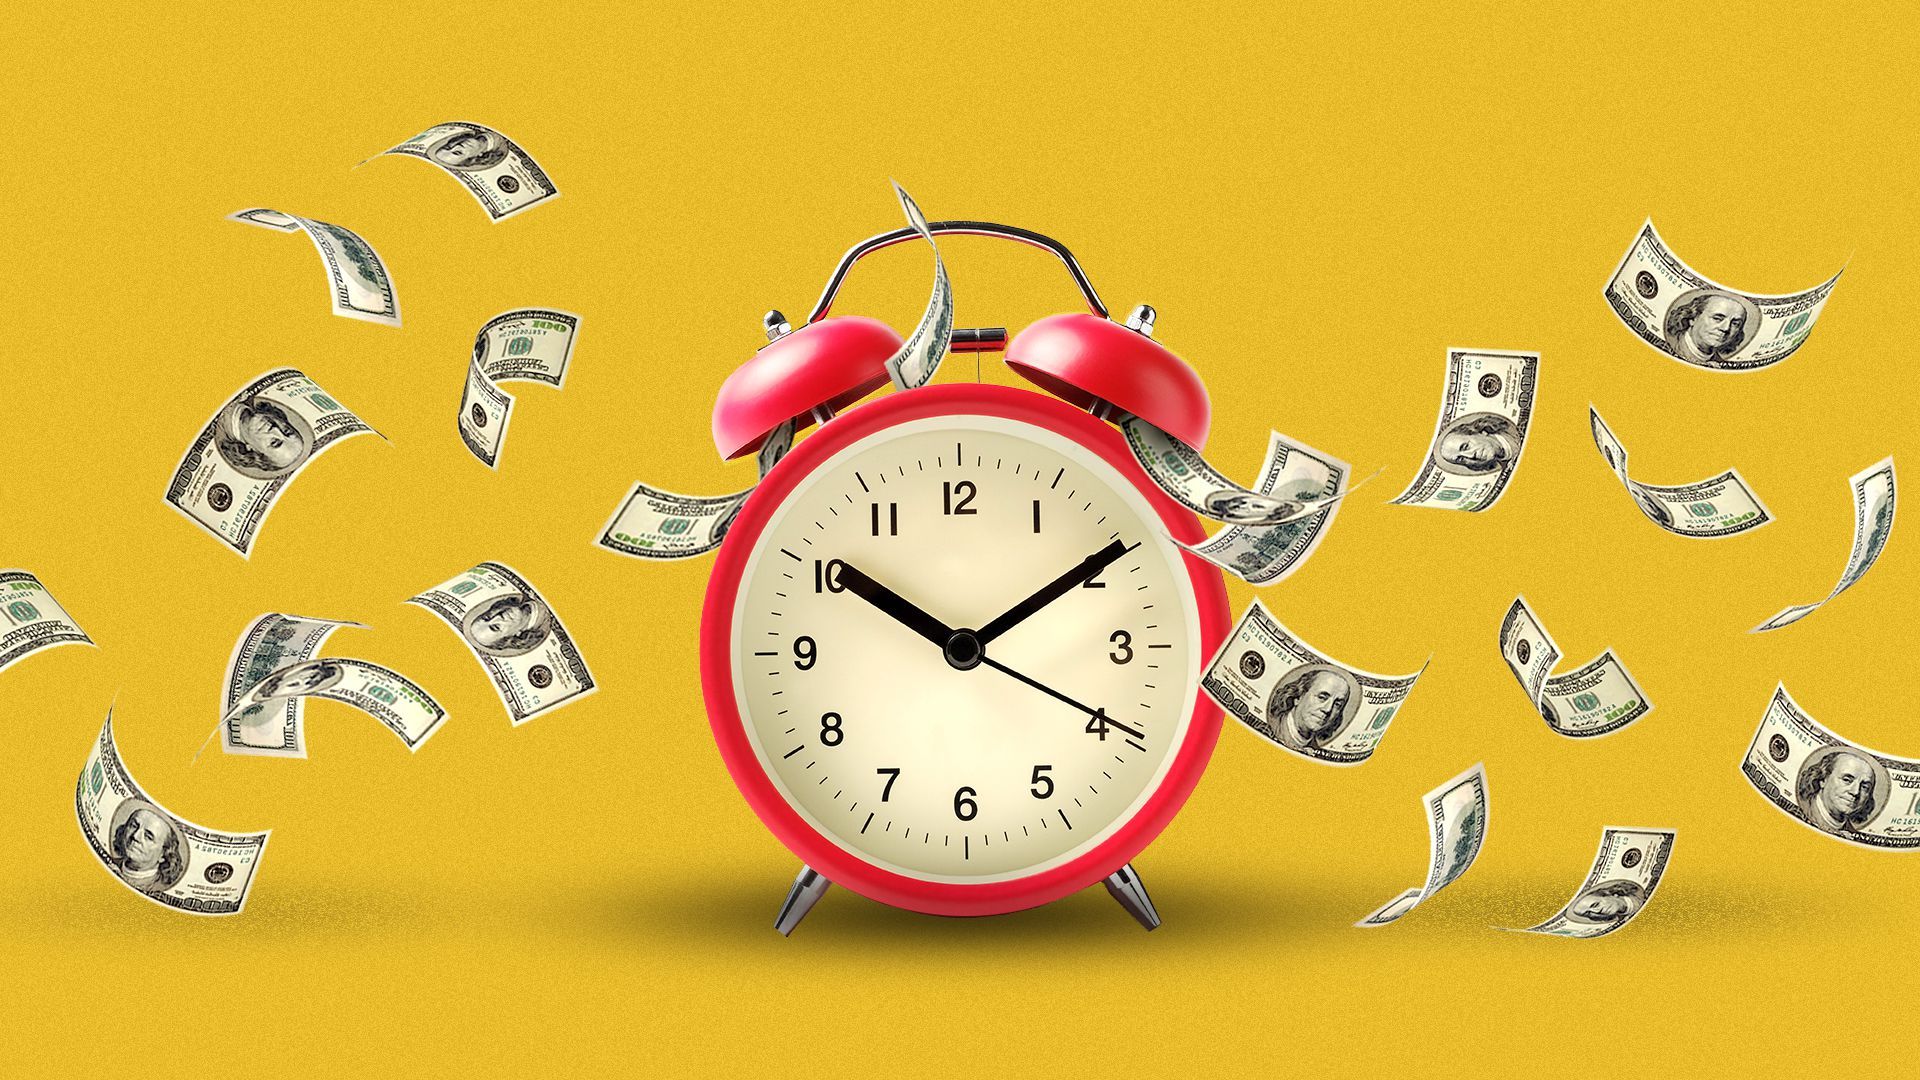 Illustration of an alarm clock with money spilling out as it is ringing.